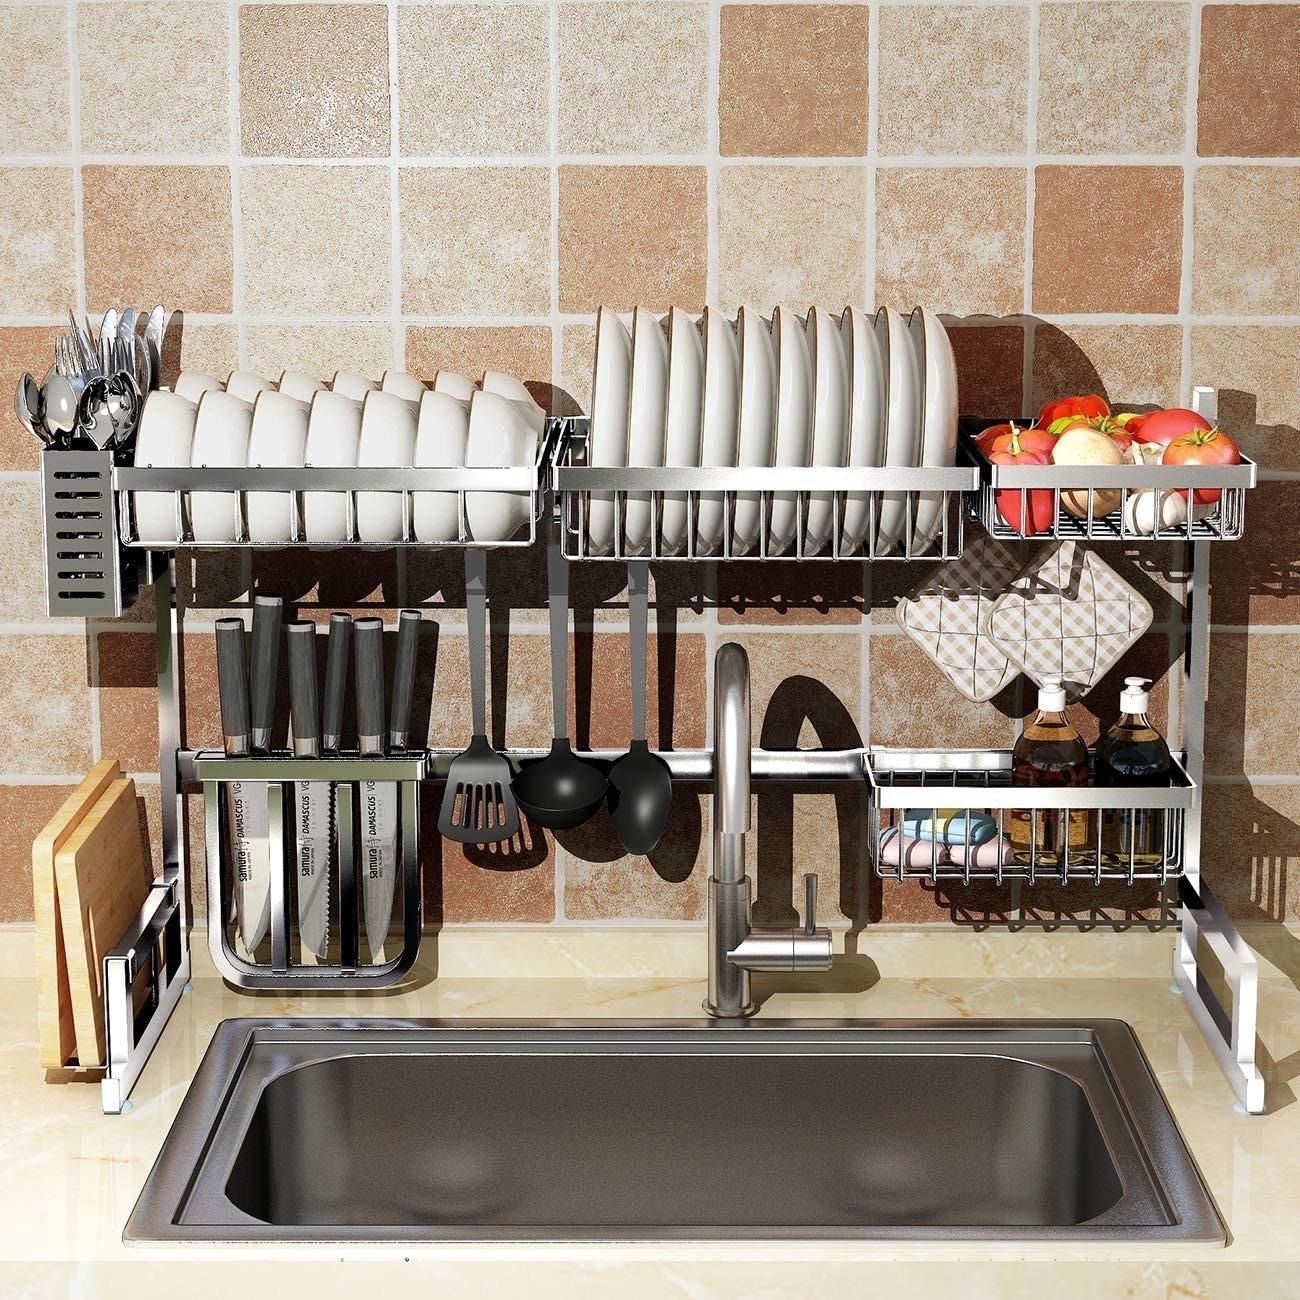 Drying rack around the edges of a sink. It has over a dozen bowls/dishes, a spot holding product, another holding knives, space to hang spoons and spatuals, a shelf for soaps, sponges and dishwashing liquid, and a side that holds cutting boards upright. 